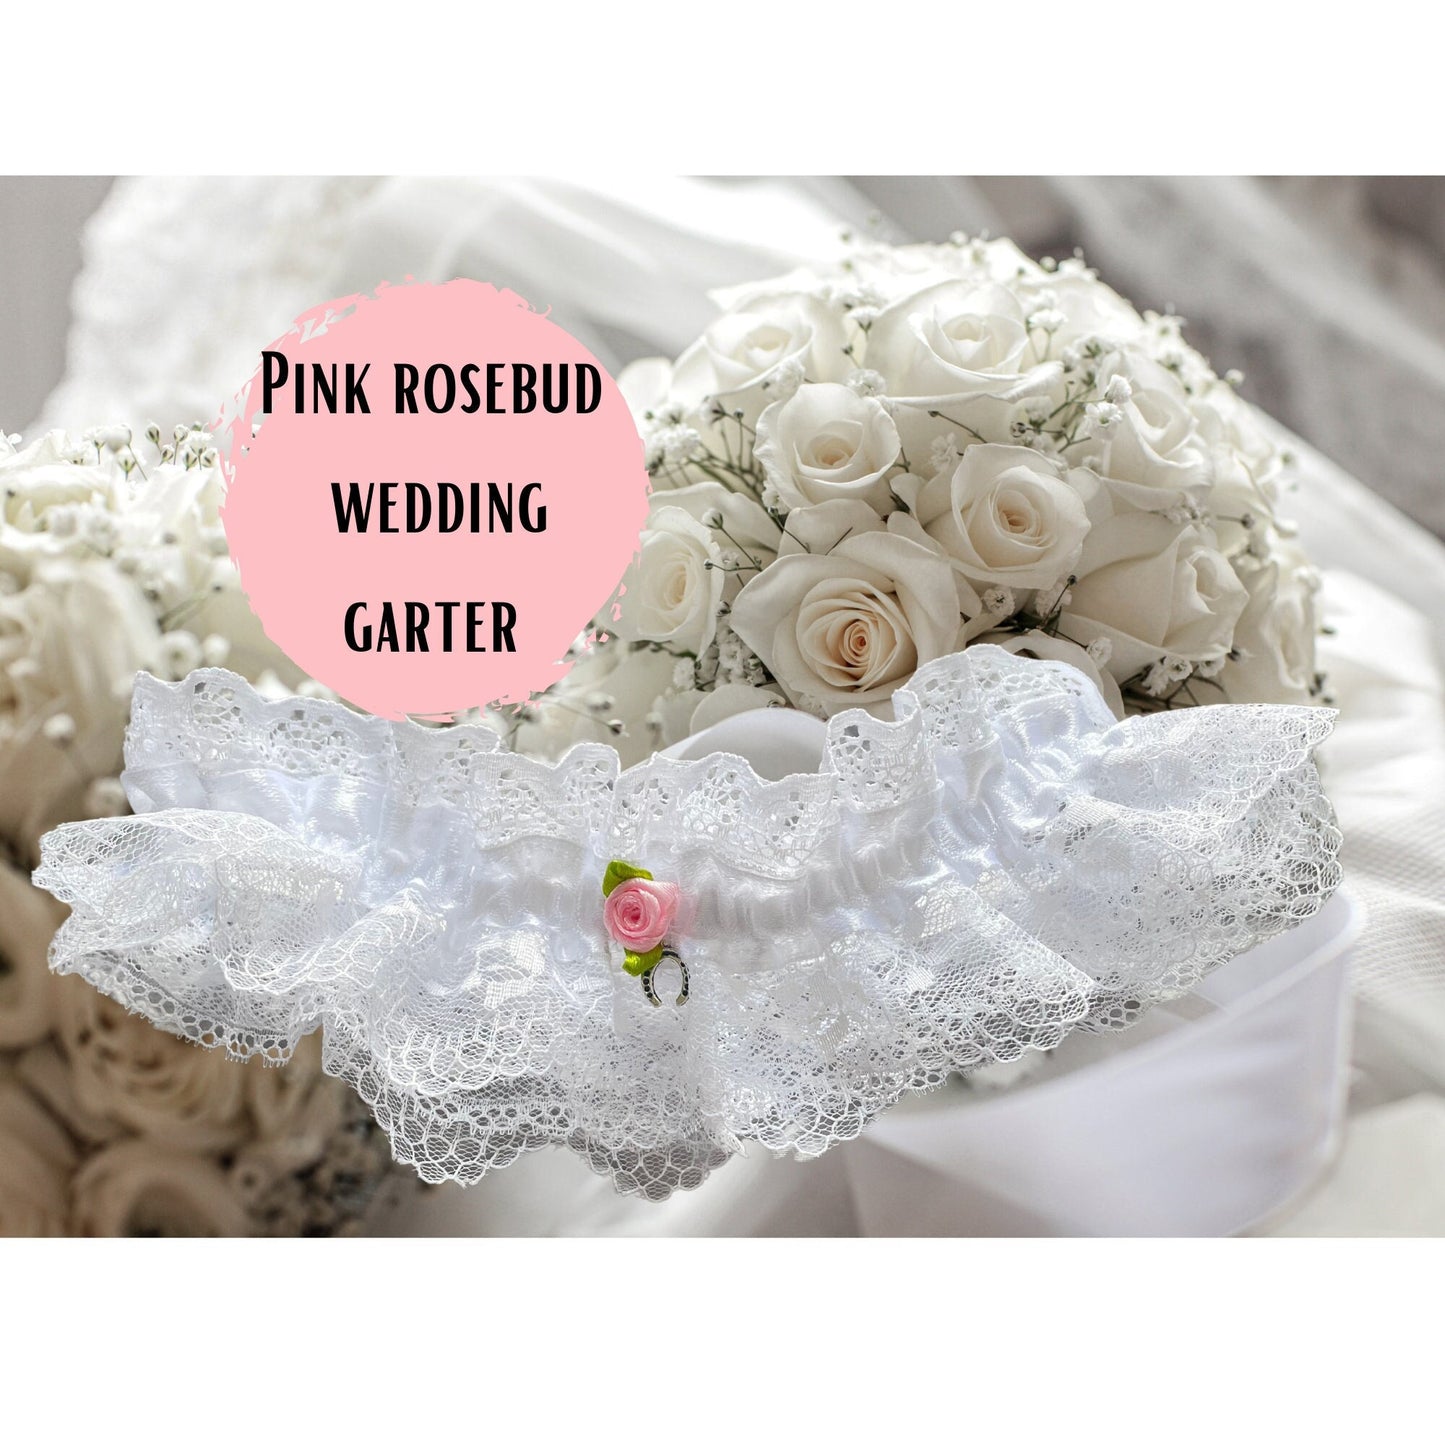 Pink Rosebud Wedding Day Garter Lovecore Blush Pink Floral White Layered Lace Elasticated Wedding Day Gift for Bride Lucky Horseshoe Charm